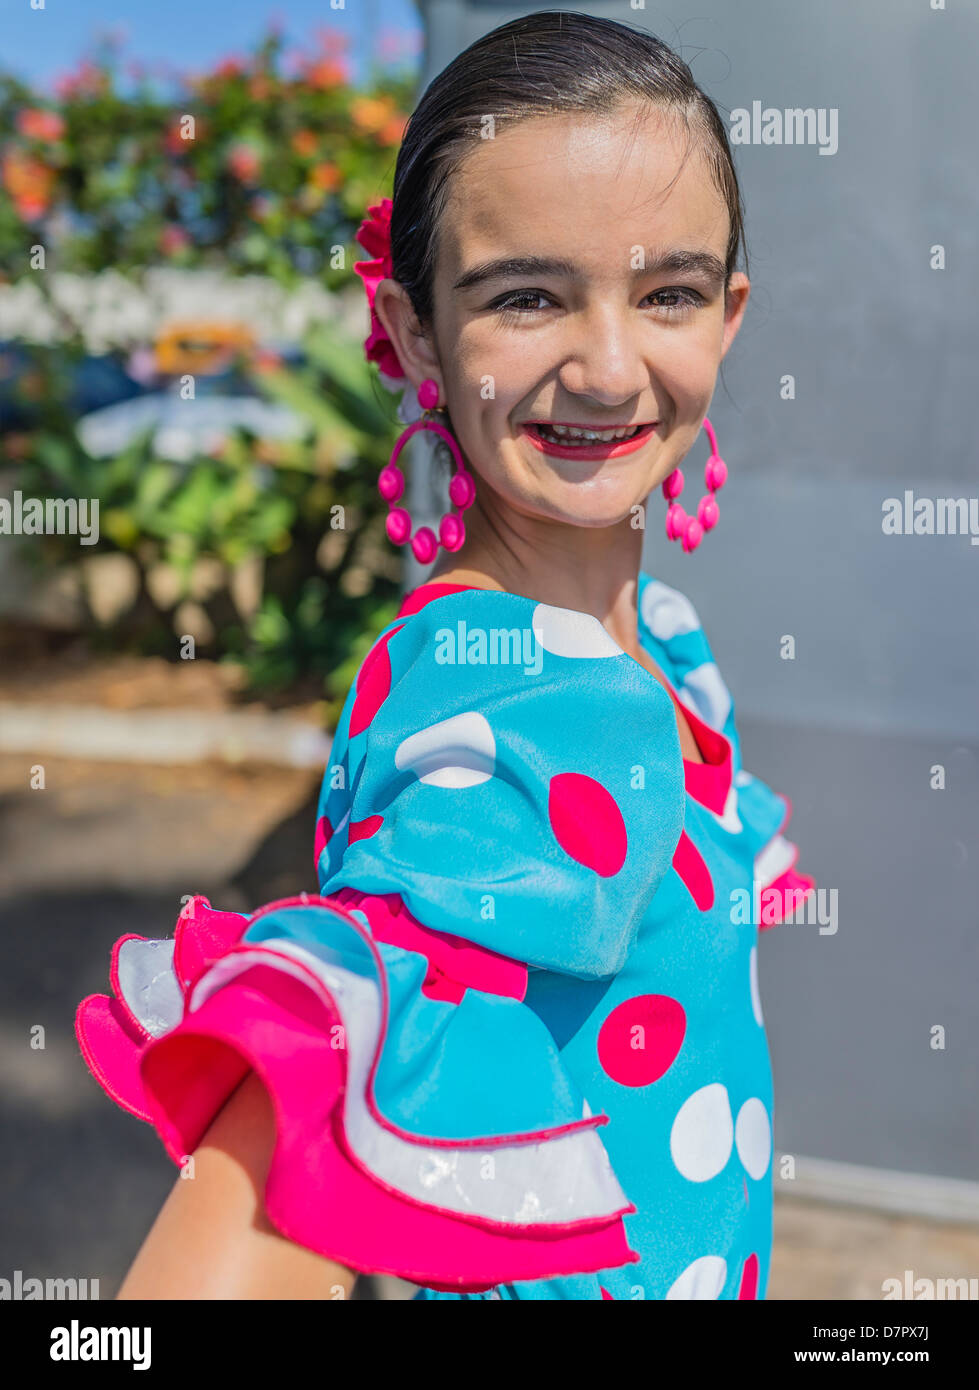 A Hispanic child dancer in her early teens poses in her colorful traditional Flamenco dance outfit, dress, earrings & hair bow. Stock Photo